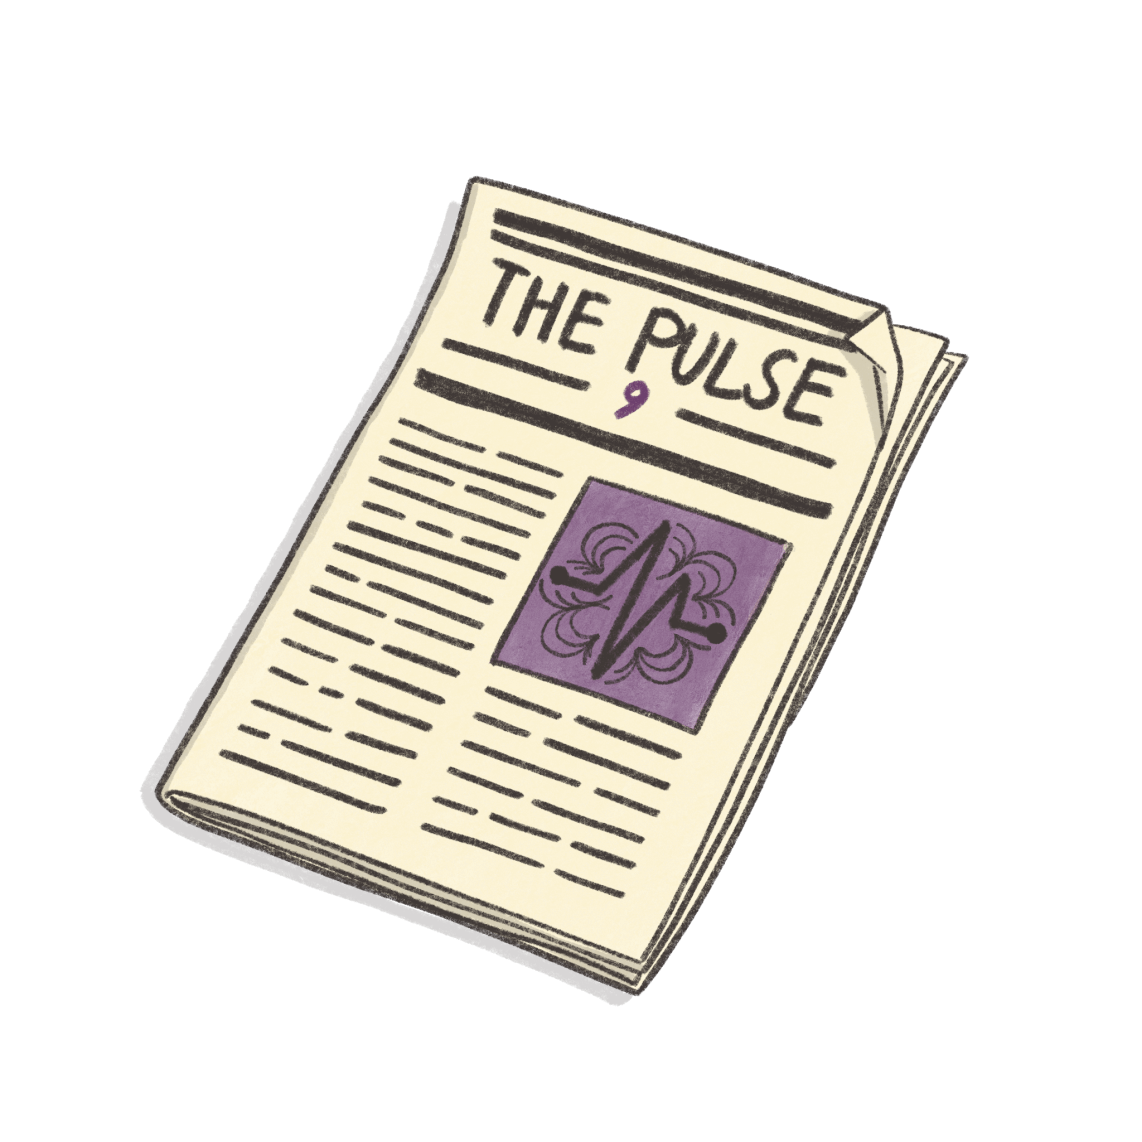 The Apoio Pulse – Issue Nine